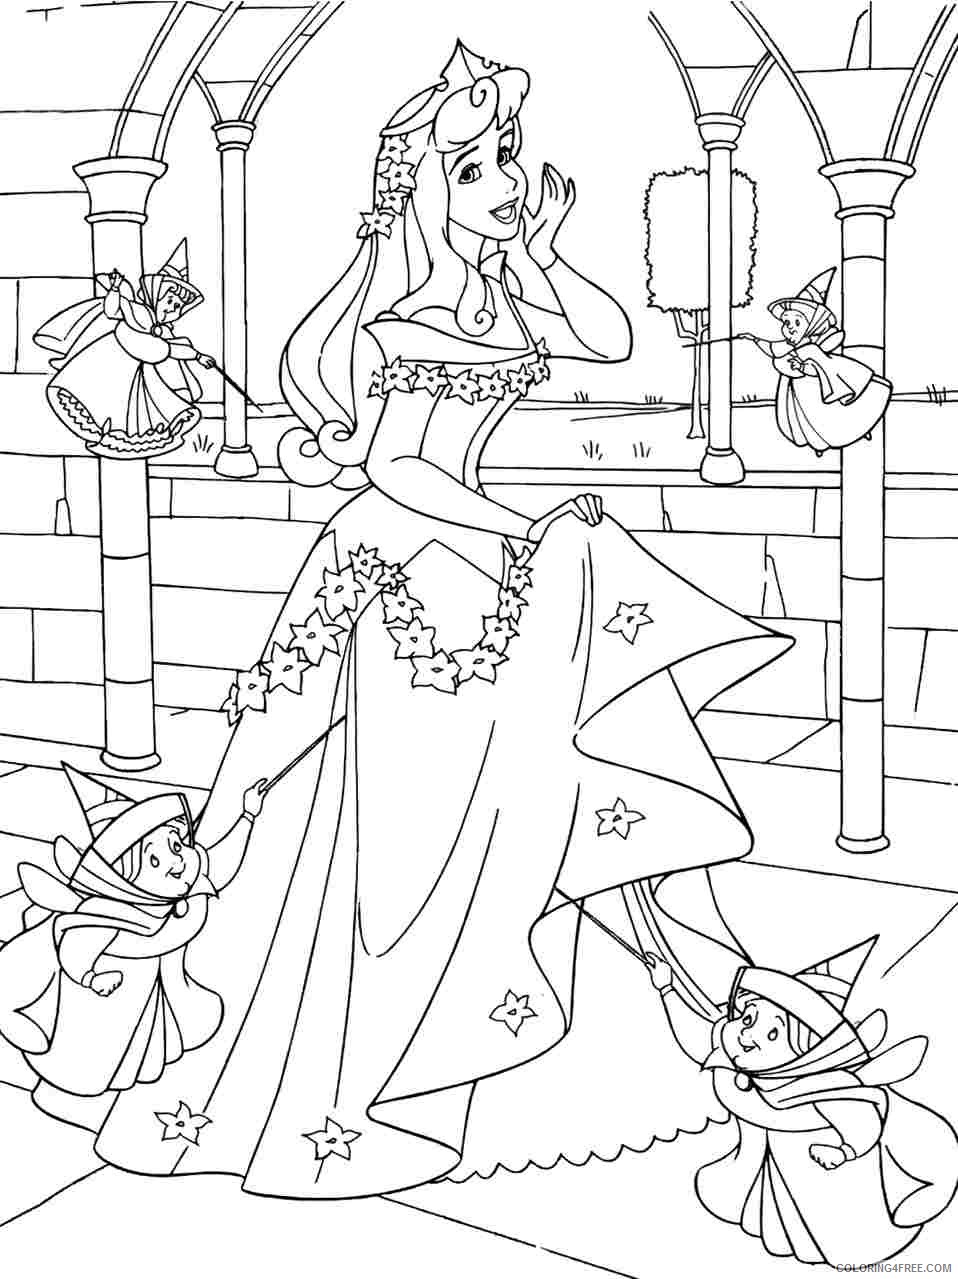 Sleeping Beauty Coloring Pages Cartoons Sleeping Beauty 2 Printable 2020 5599 Coloring4free